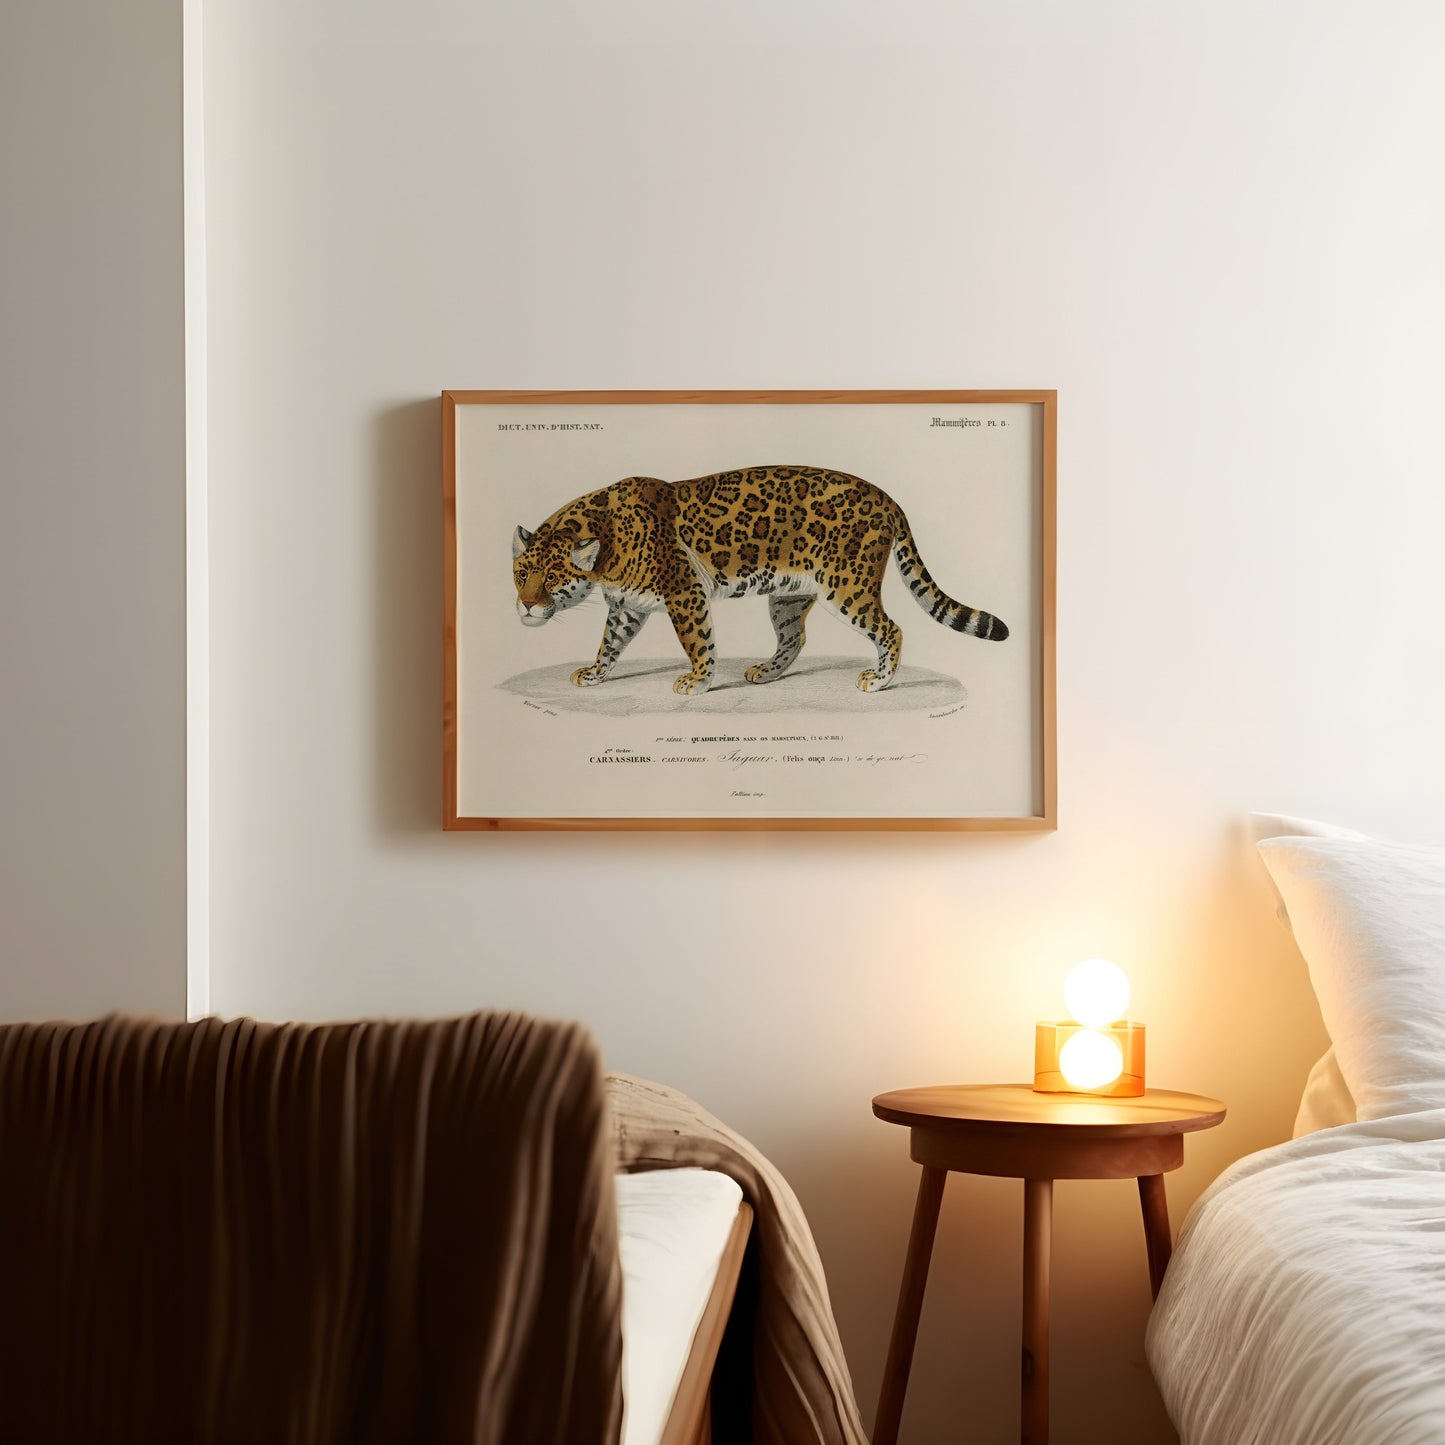 a picture of a cat on a wall above a bed